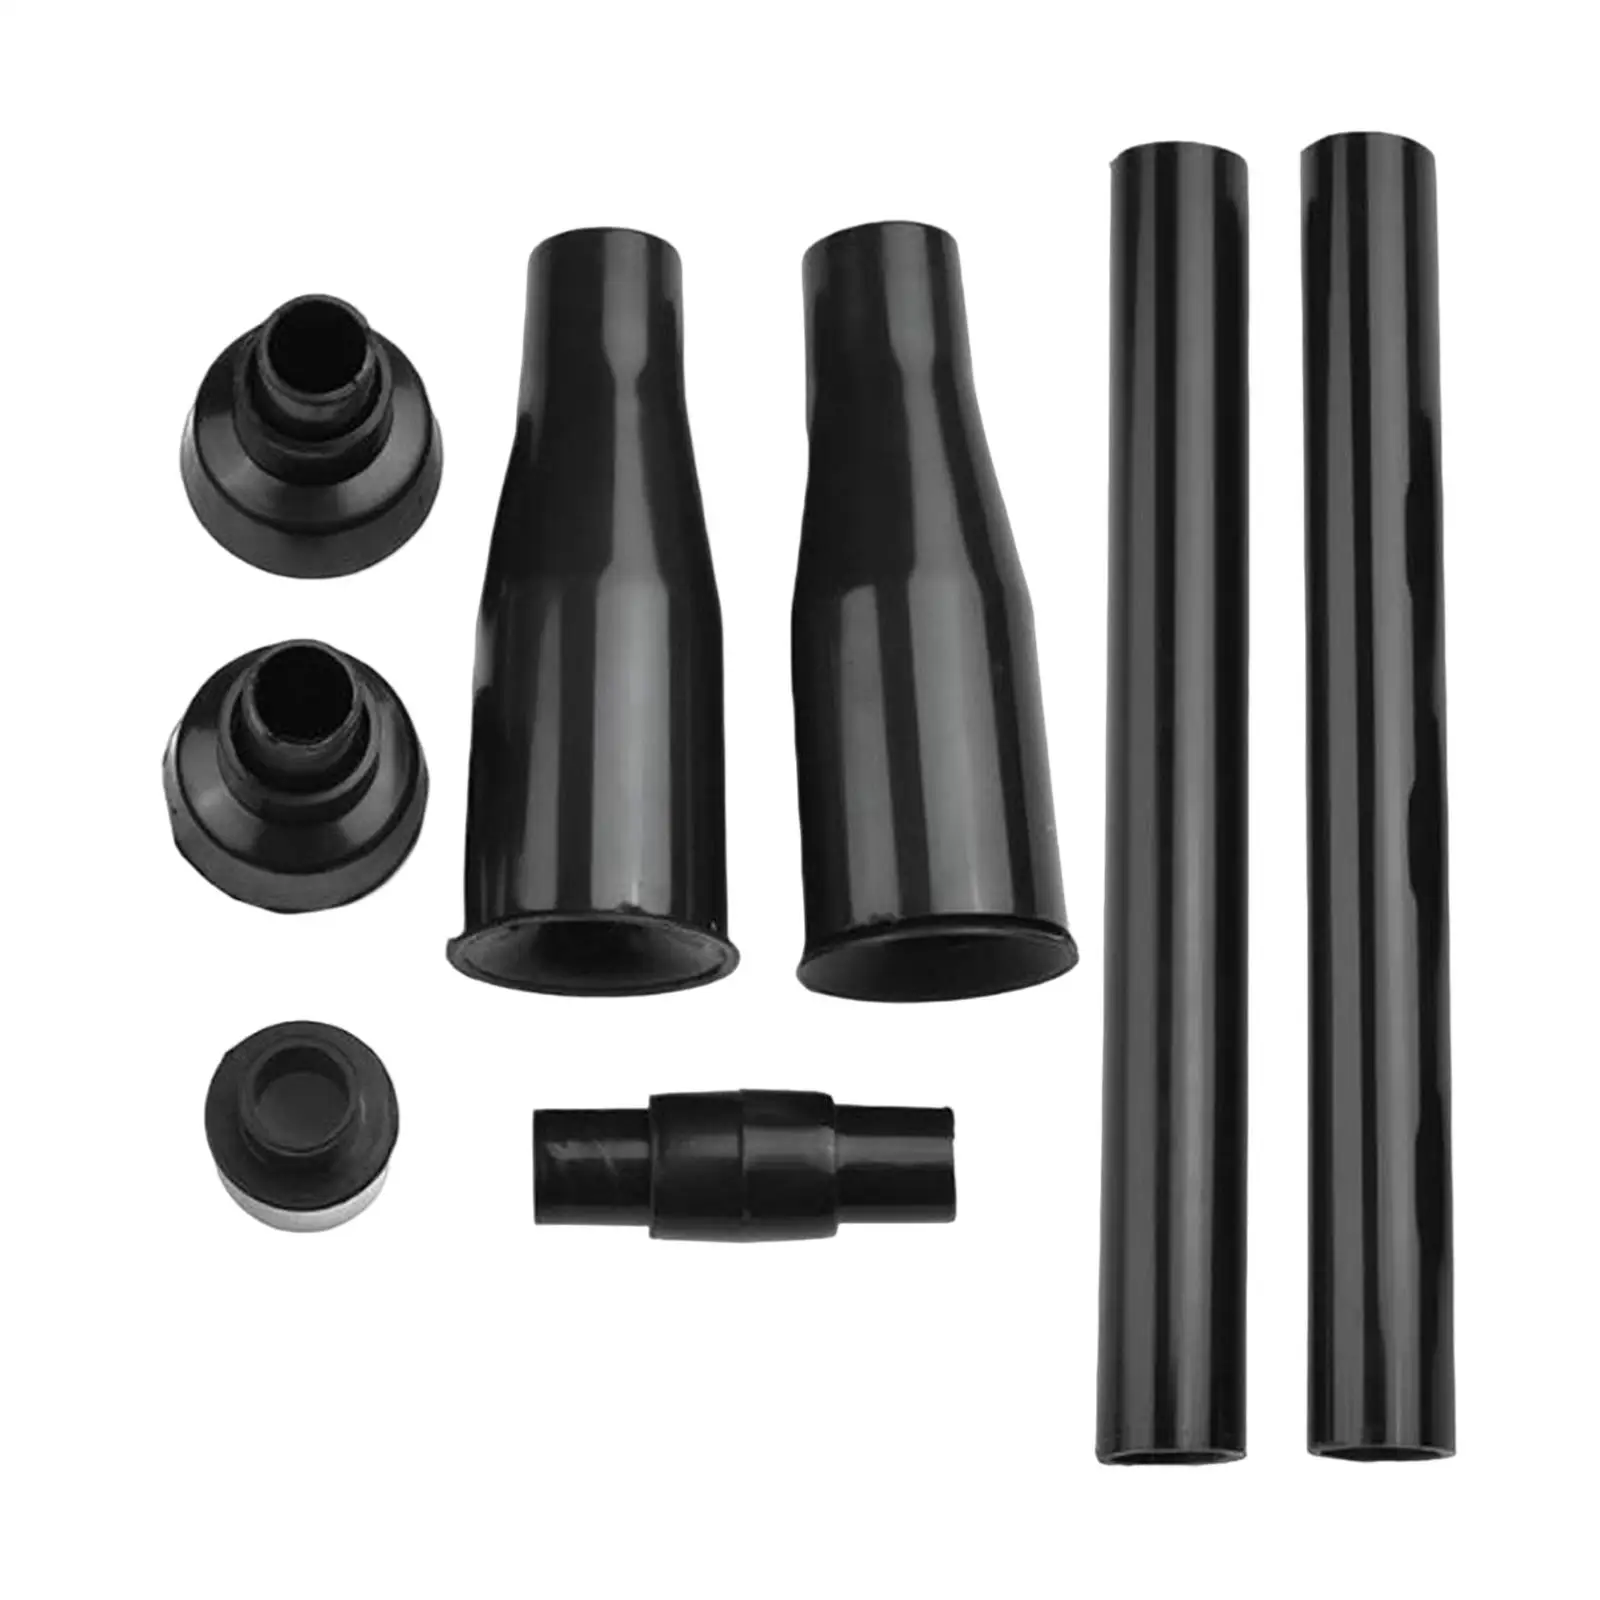 8 Pieces Fountain Nozzle Accessories for Pool Outdoor Aquariums Waterfall Fountain